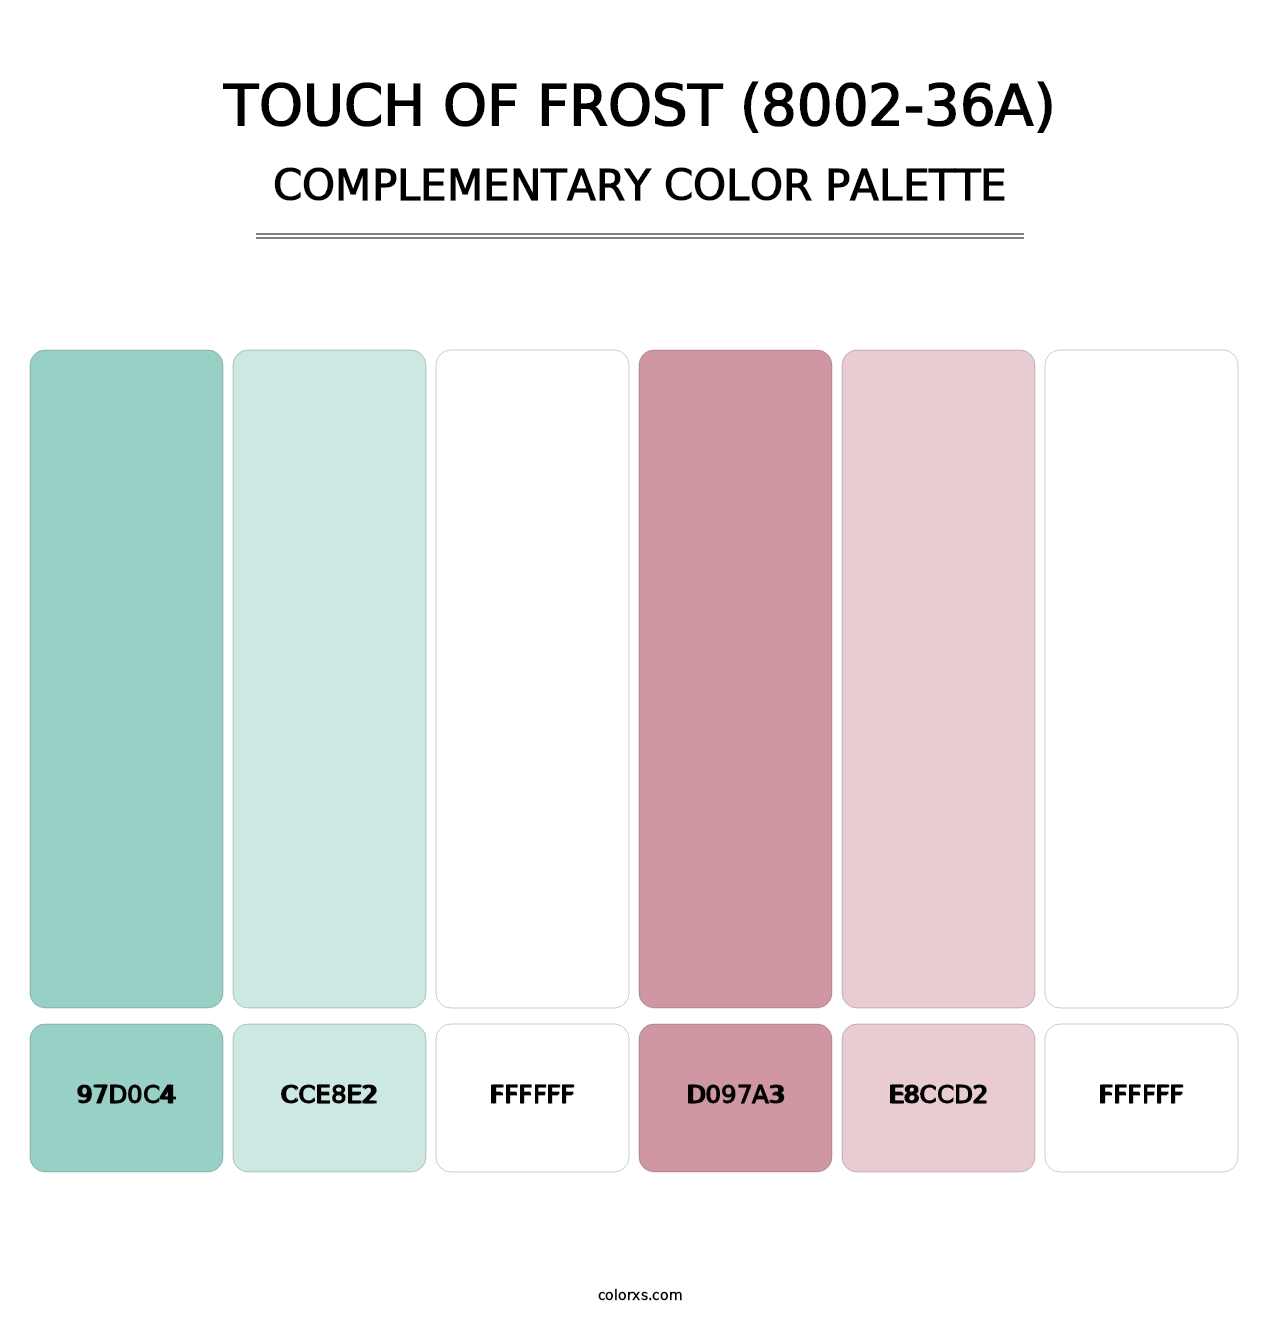 Touch of Frost (8002-36A) - Complementary Color Palette